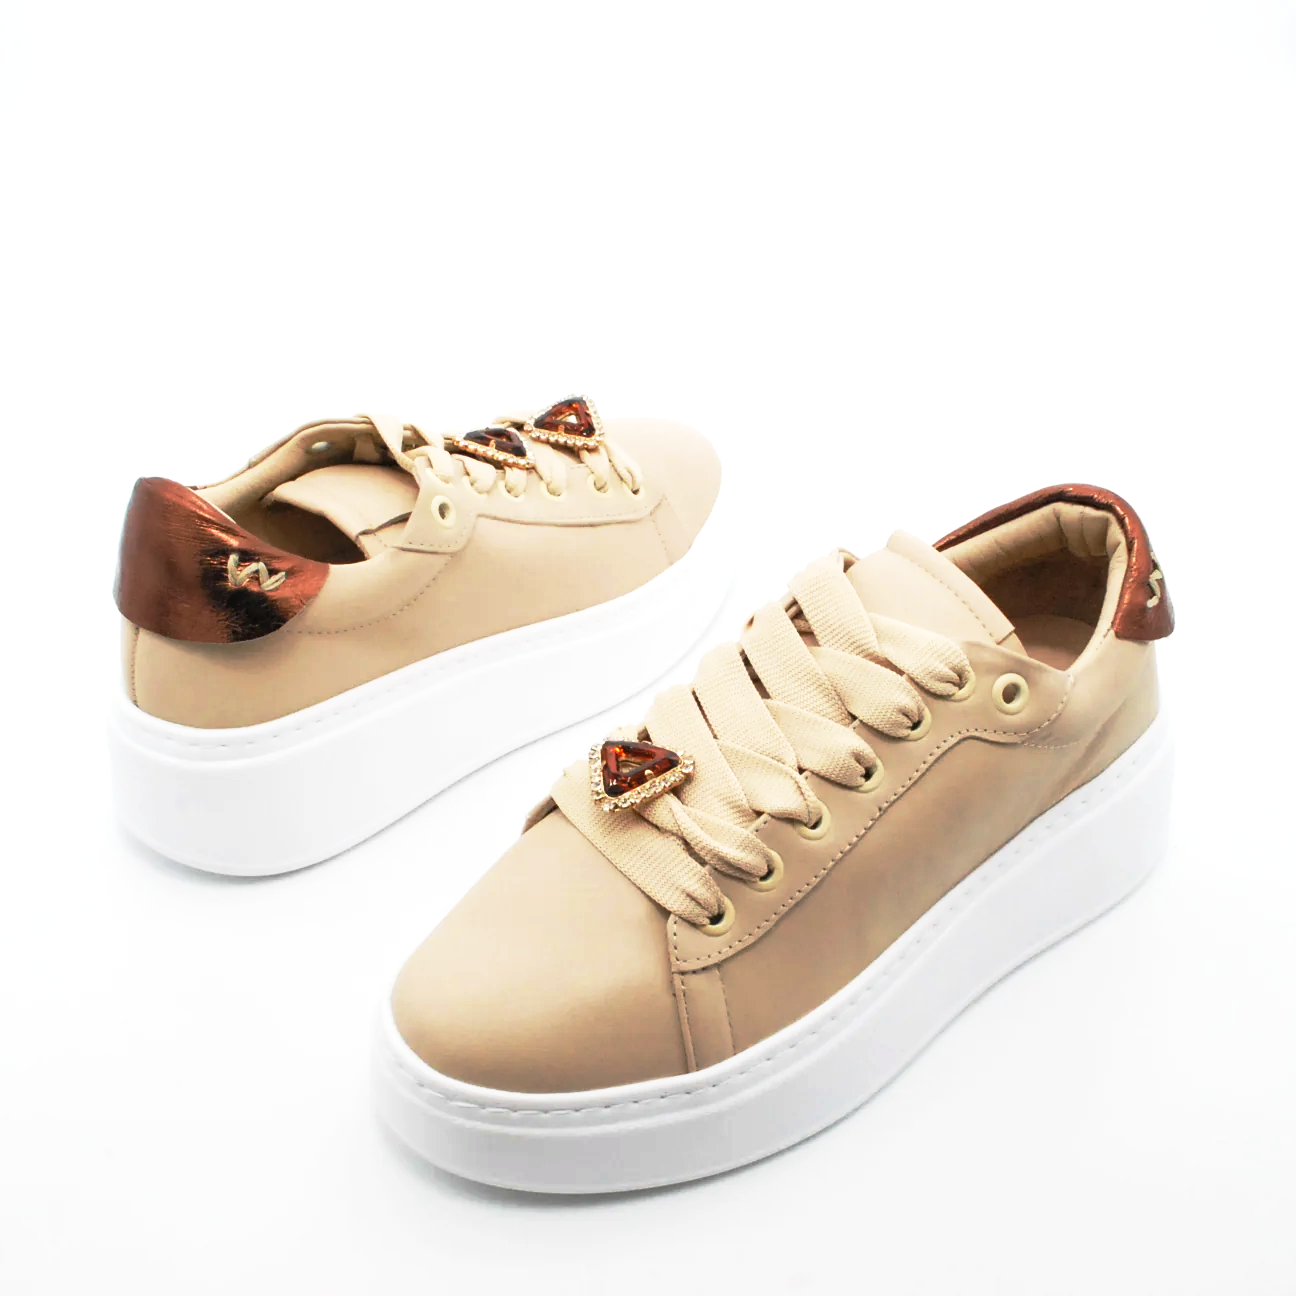 sneakers-wave-in-pelle-sneakers-2_e6f26448-a3f8-4737-946f-f471d4fa25fb.png